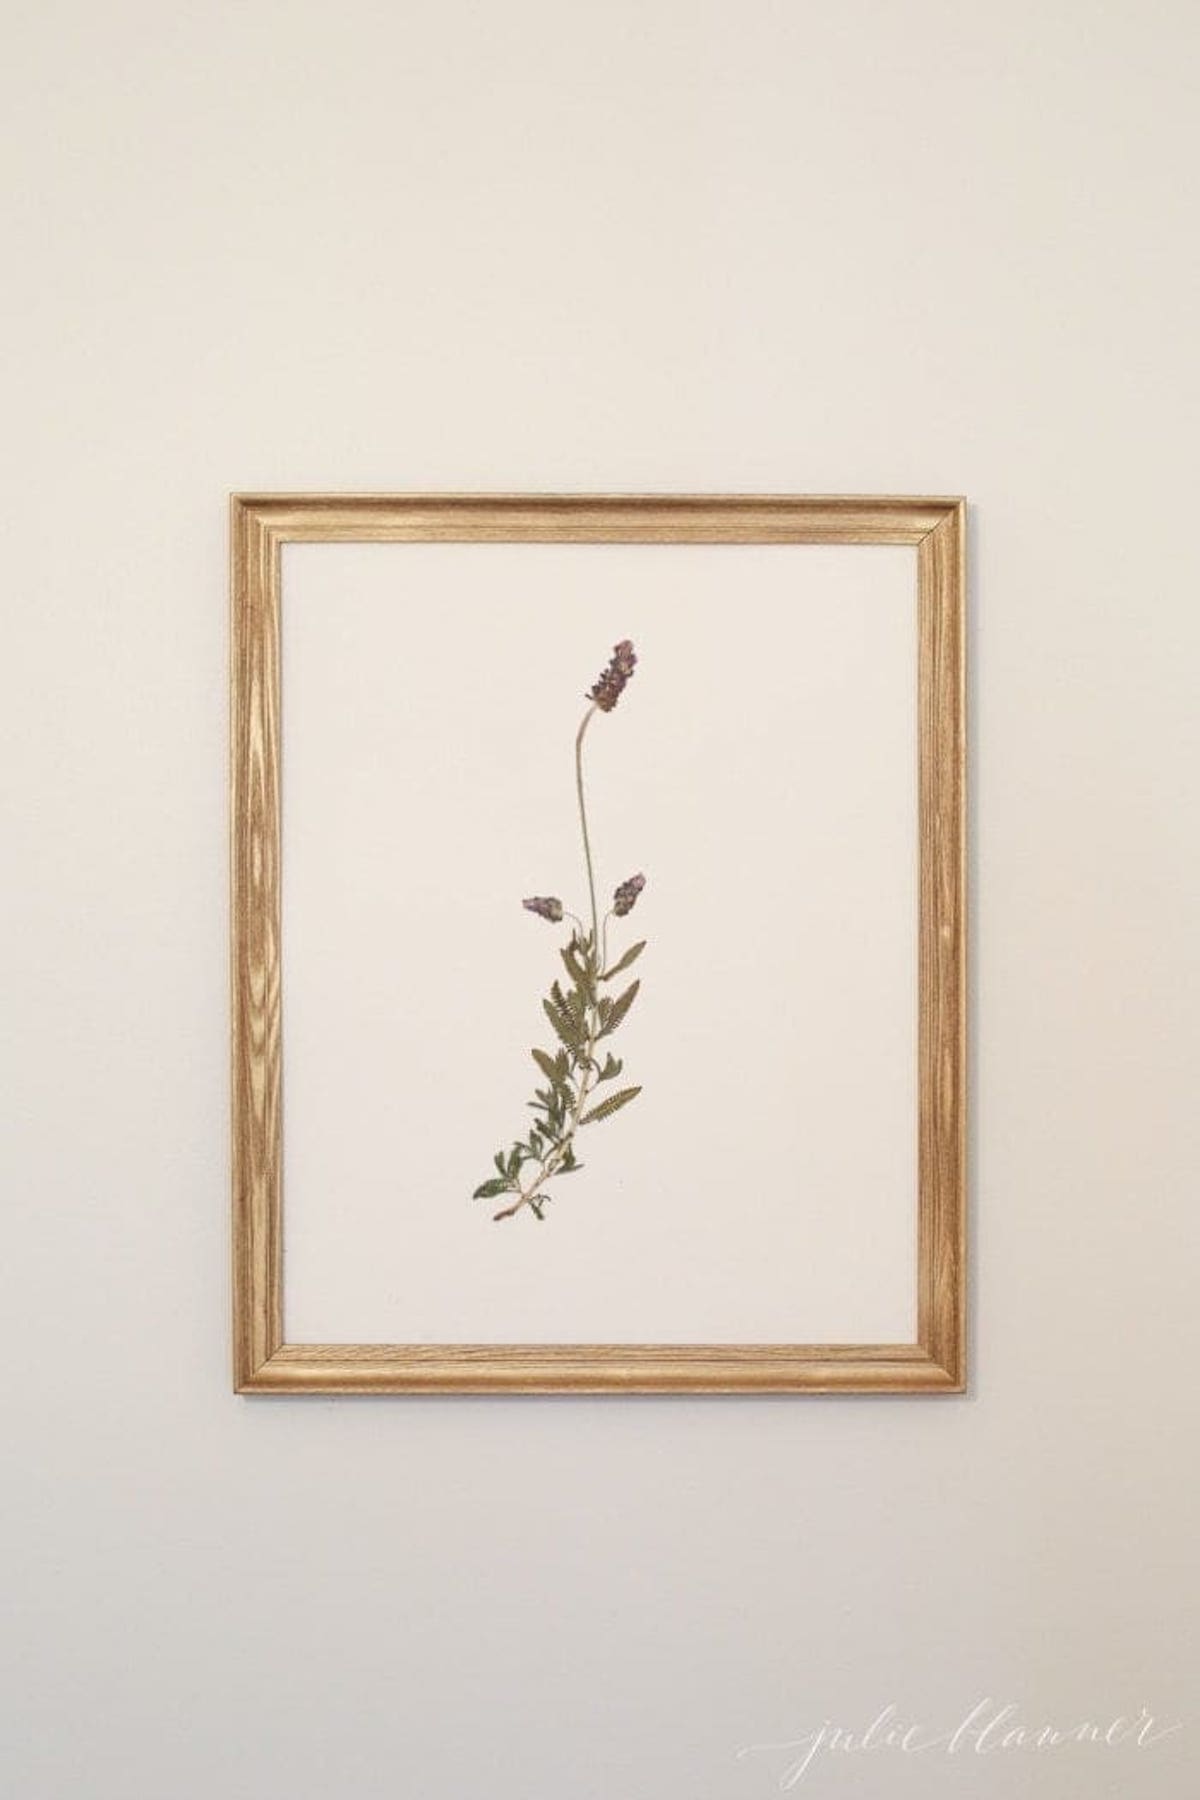 An artful print of a delicate flower hanging above a bed.